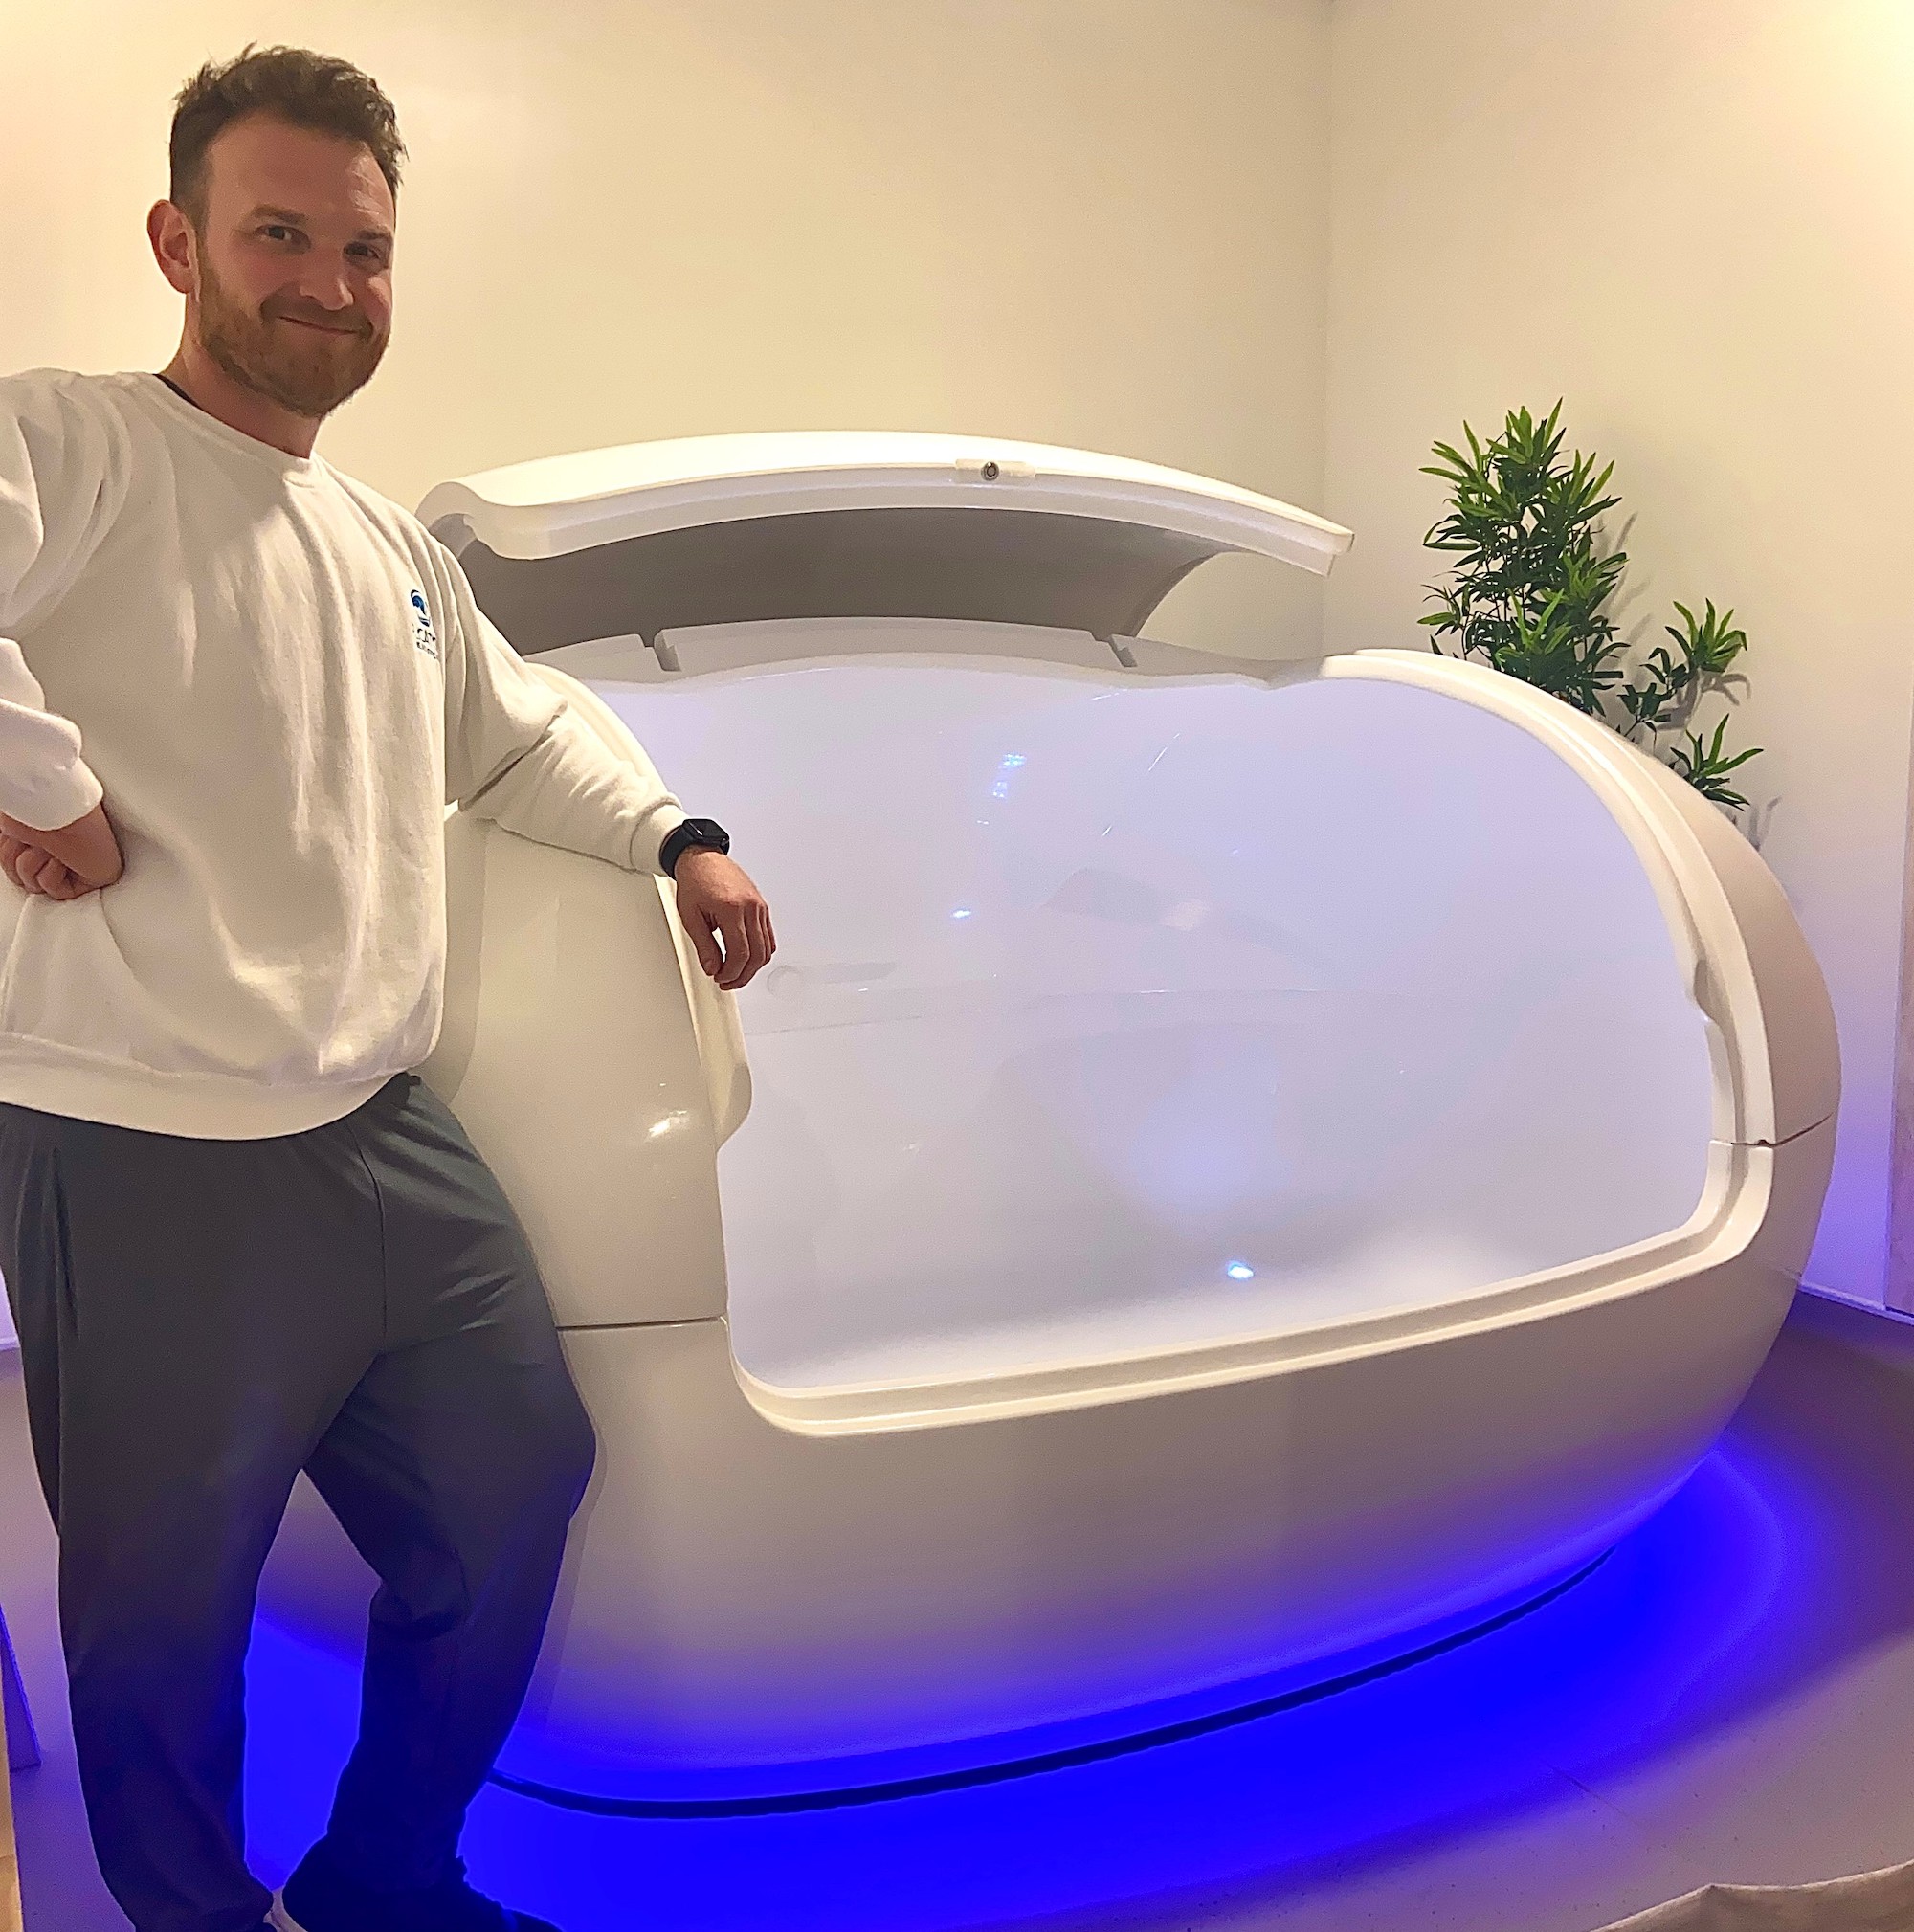 Glasgow entrepreneurs receive £50k to float first-of-its-kind wellness centre